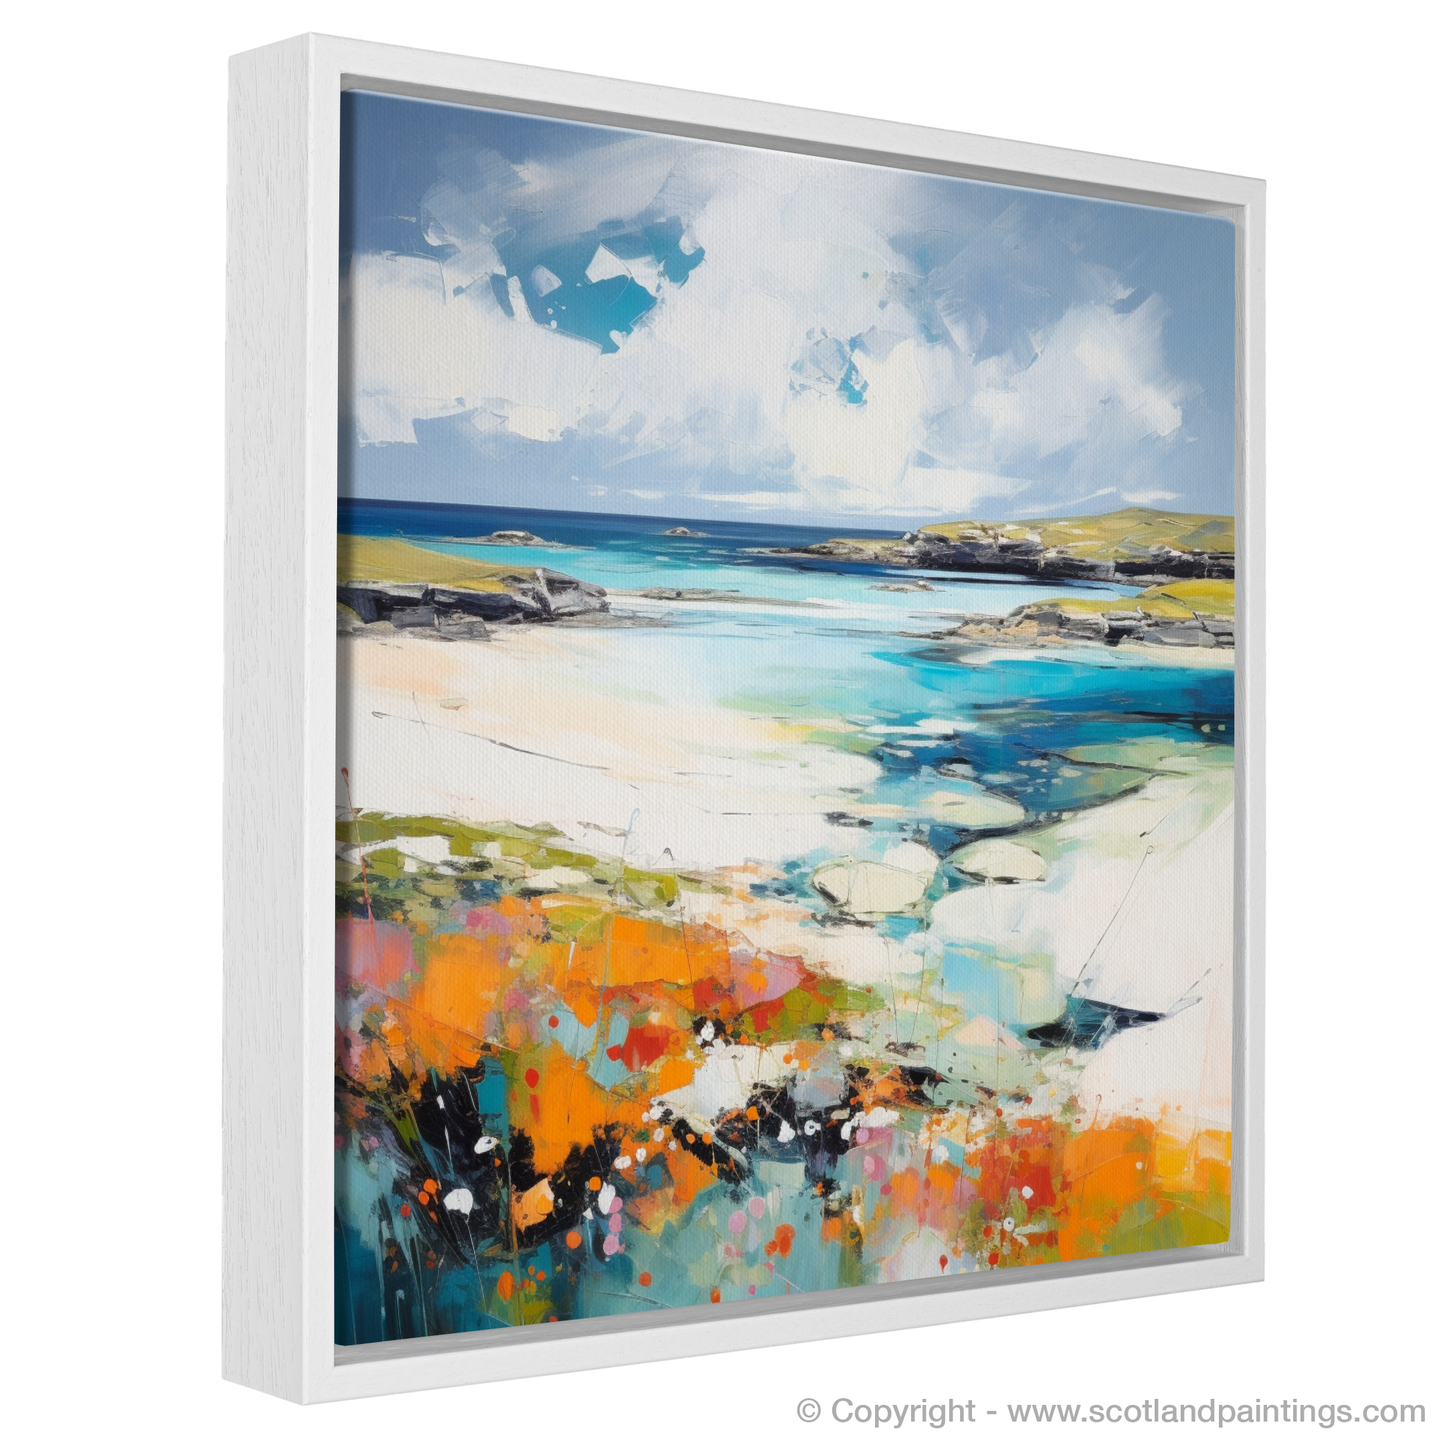 Painting and Art Print of Isle of Barra, Outer Hebrides in summer entitled "Hebridean Summer Essence".